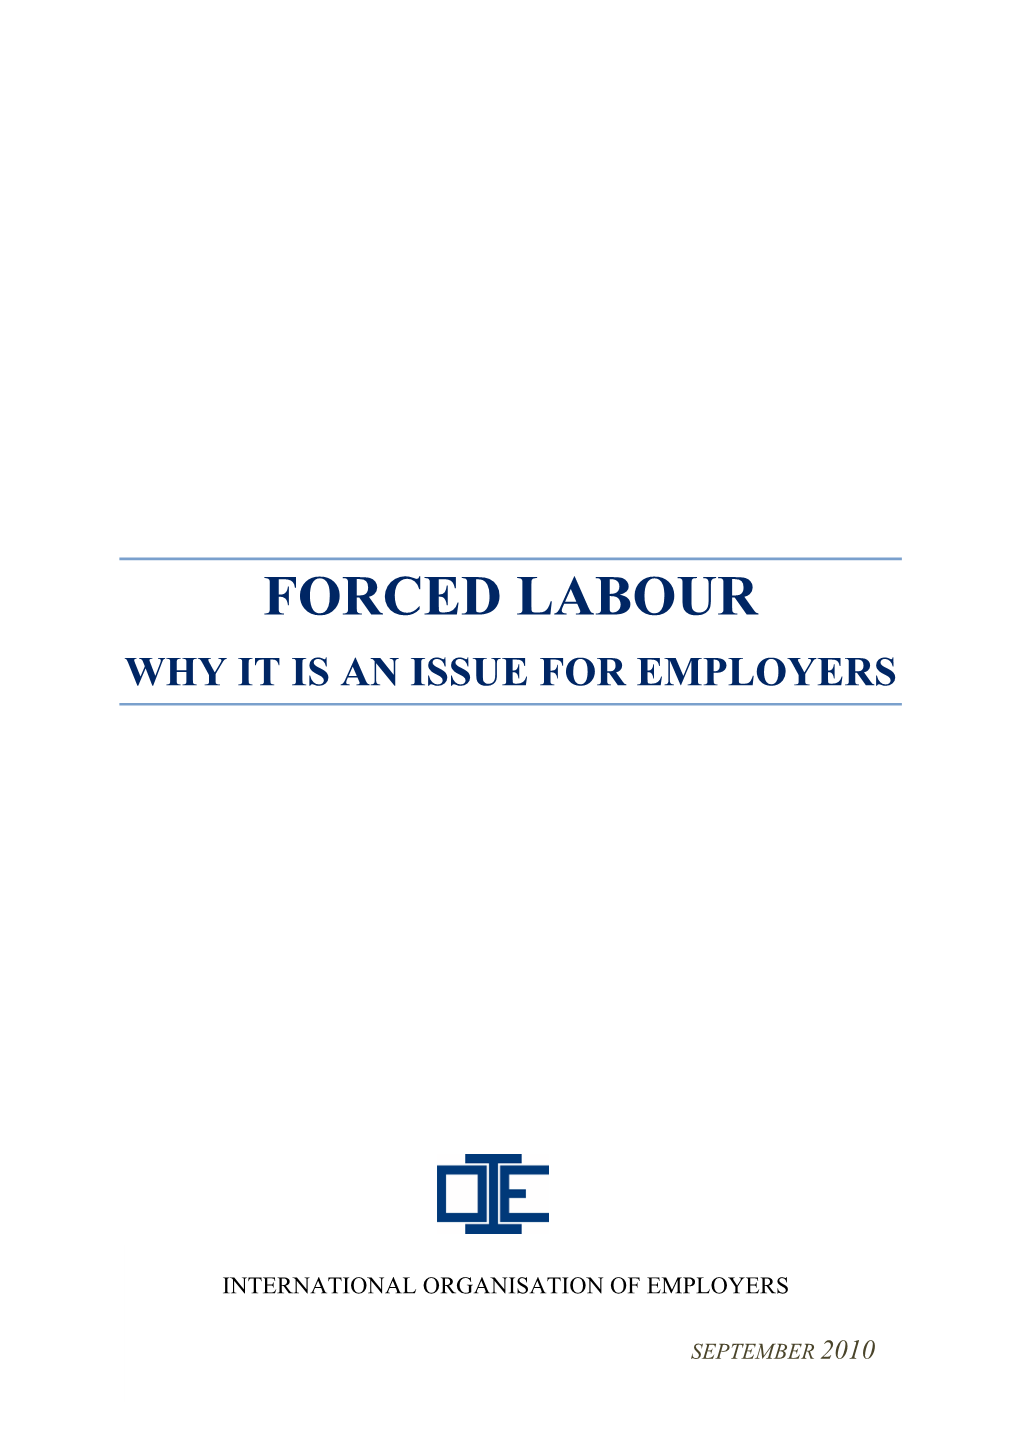 IOE Guide: Why Forced Labour Is an Issue for Employers